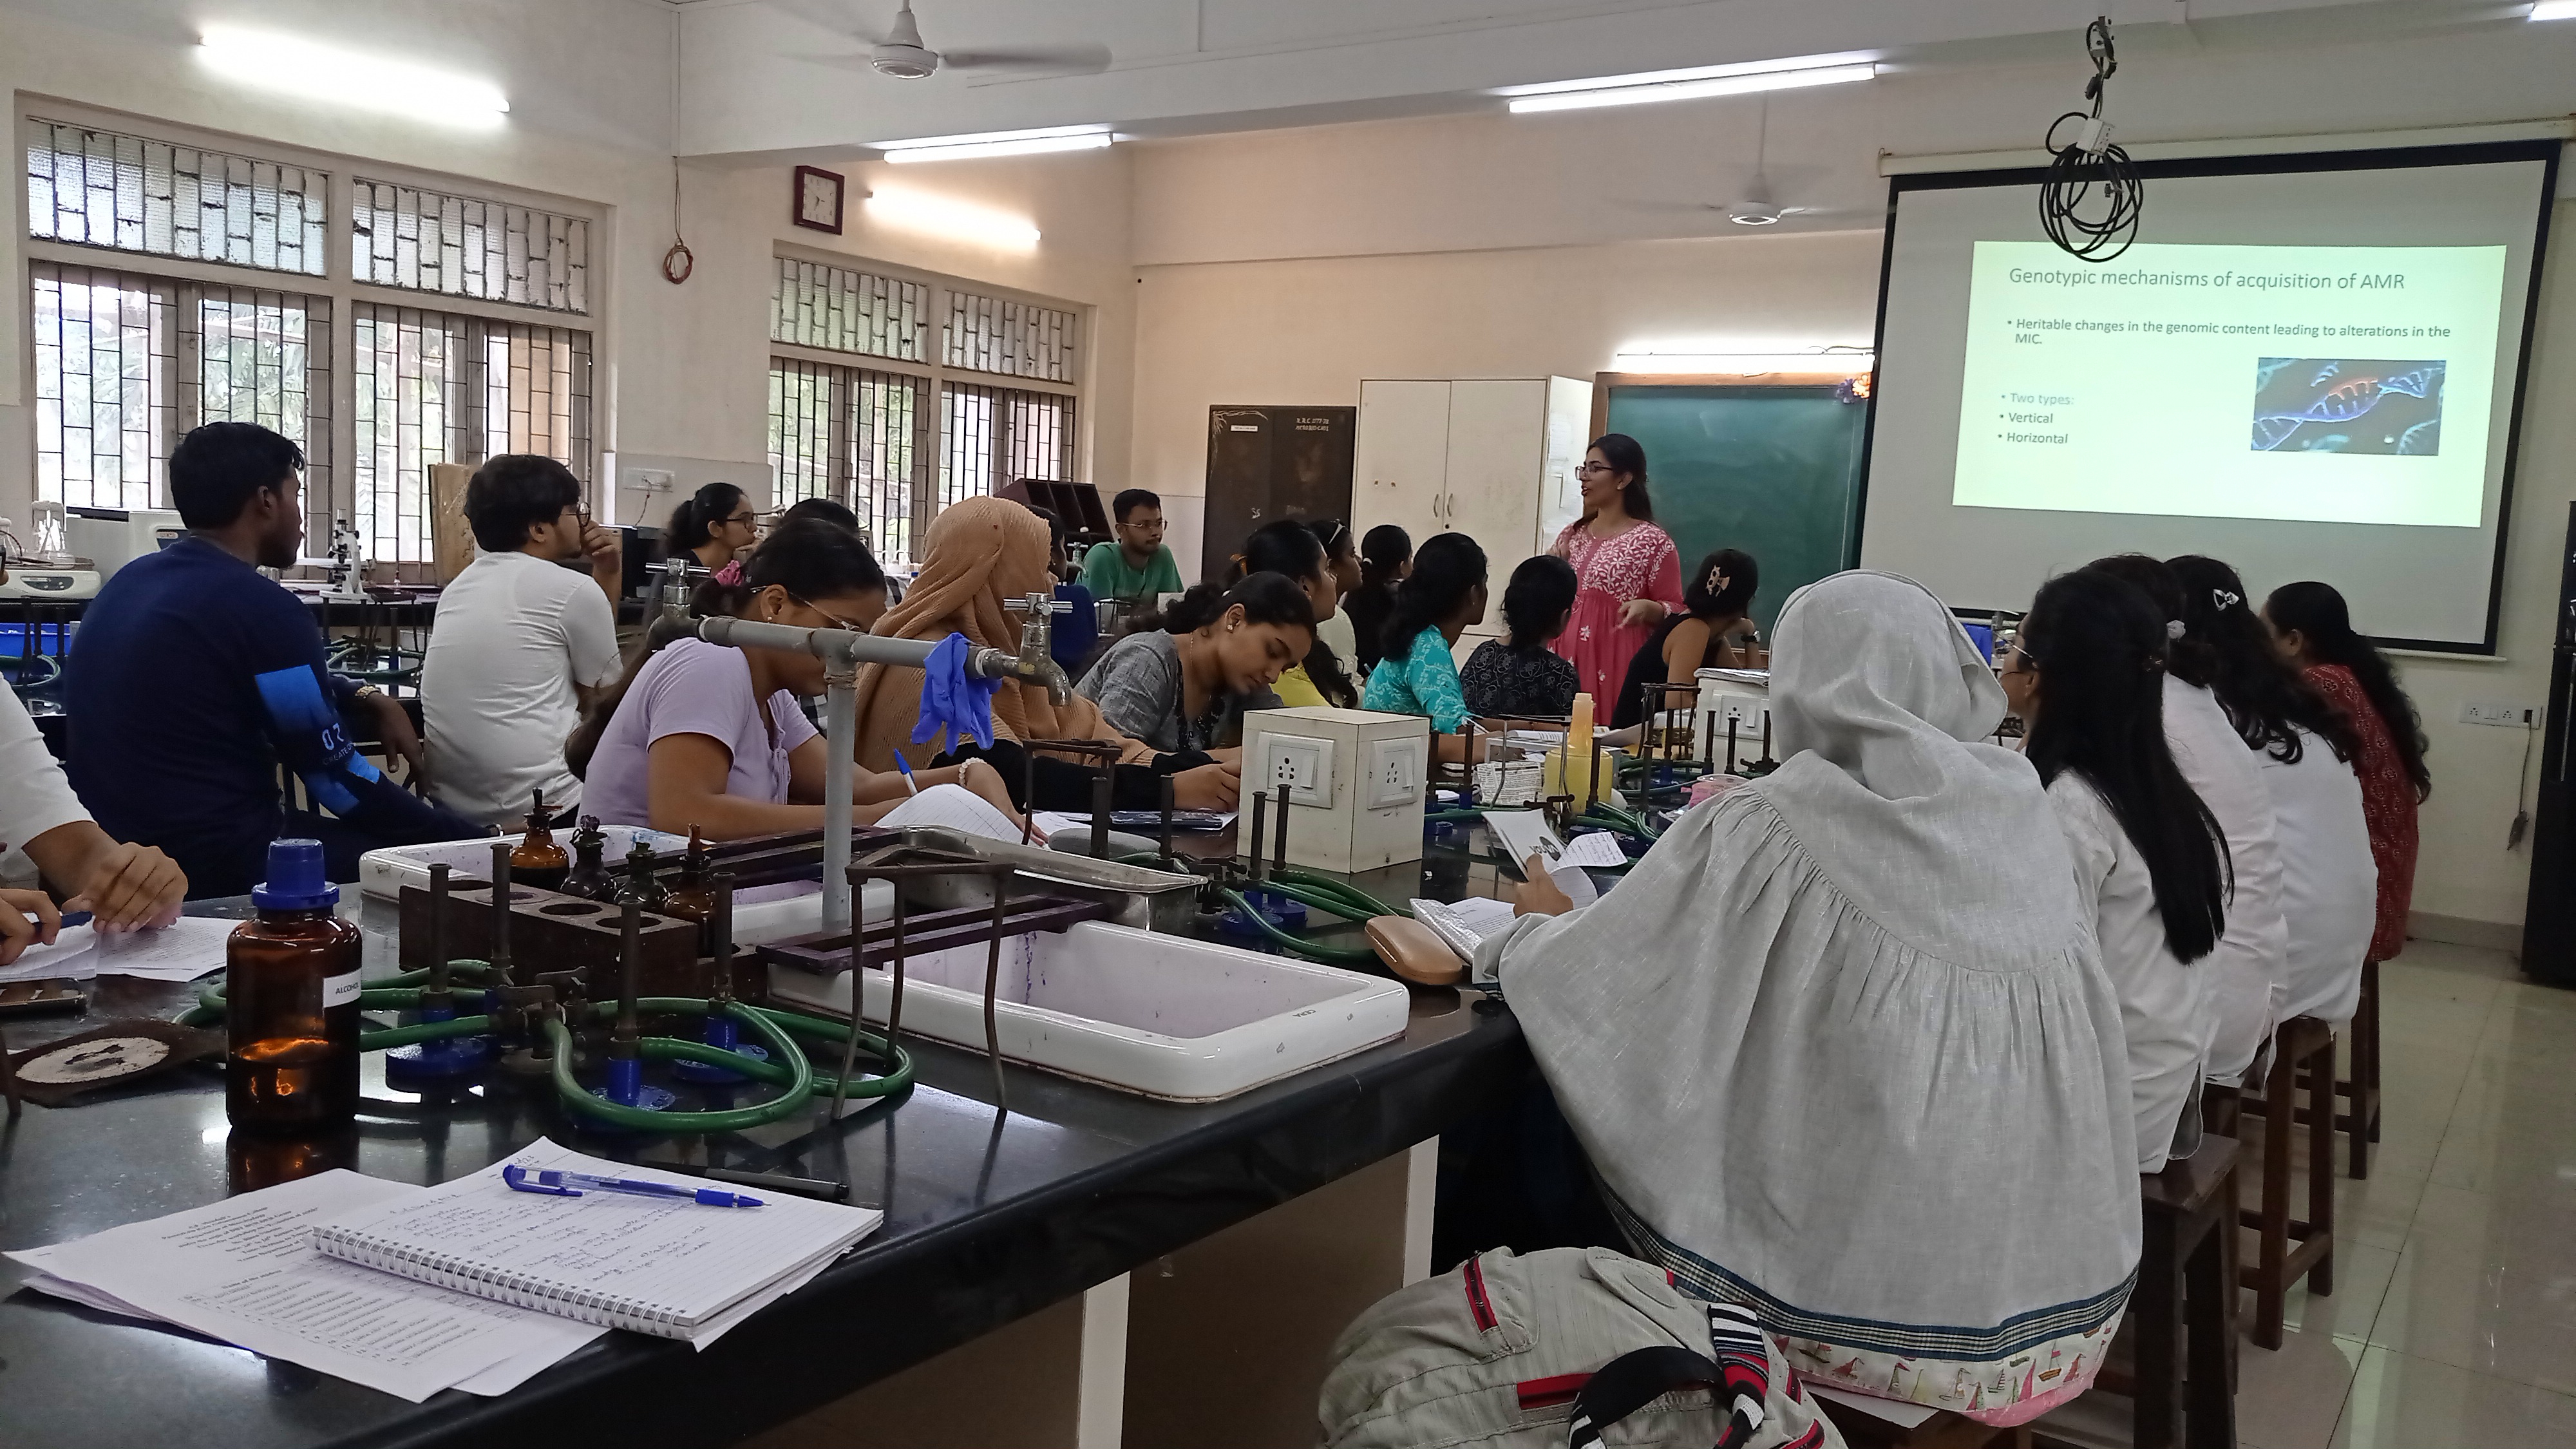 Hands-on workshop on Evolution of AMR Resource person Ms. Rhea Vinchhi Research Scholar (PMRF Fellow) IISER Pune